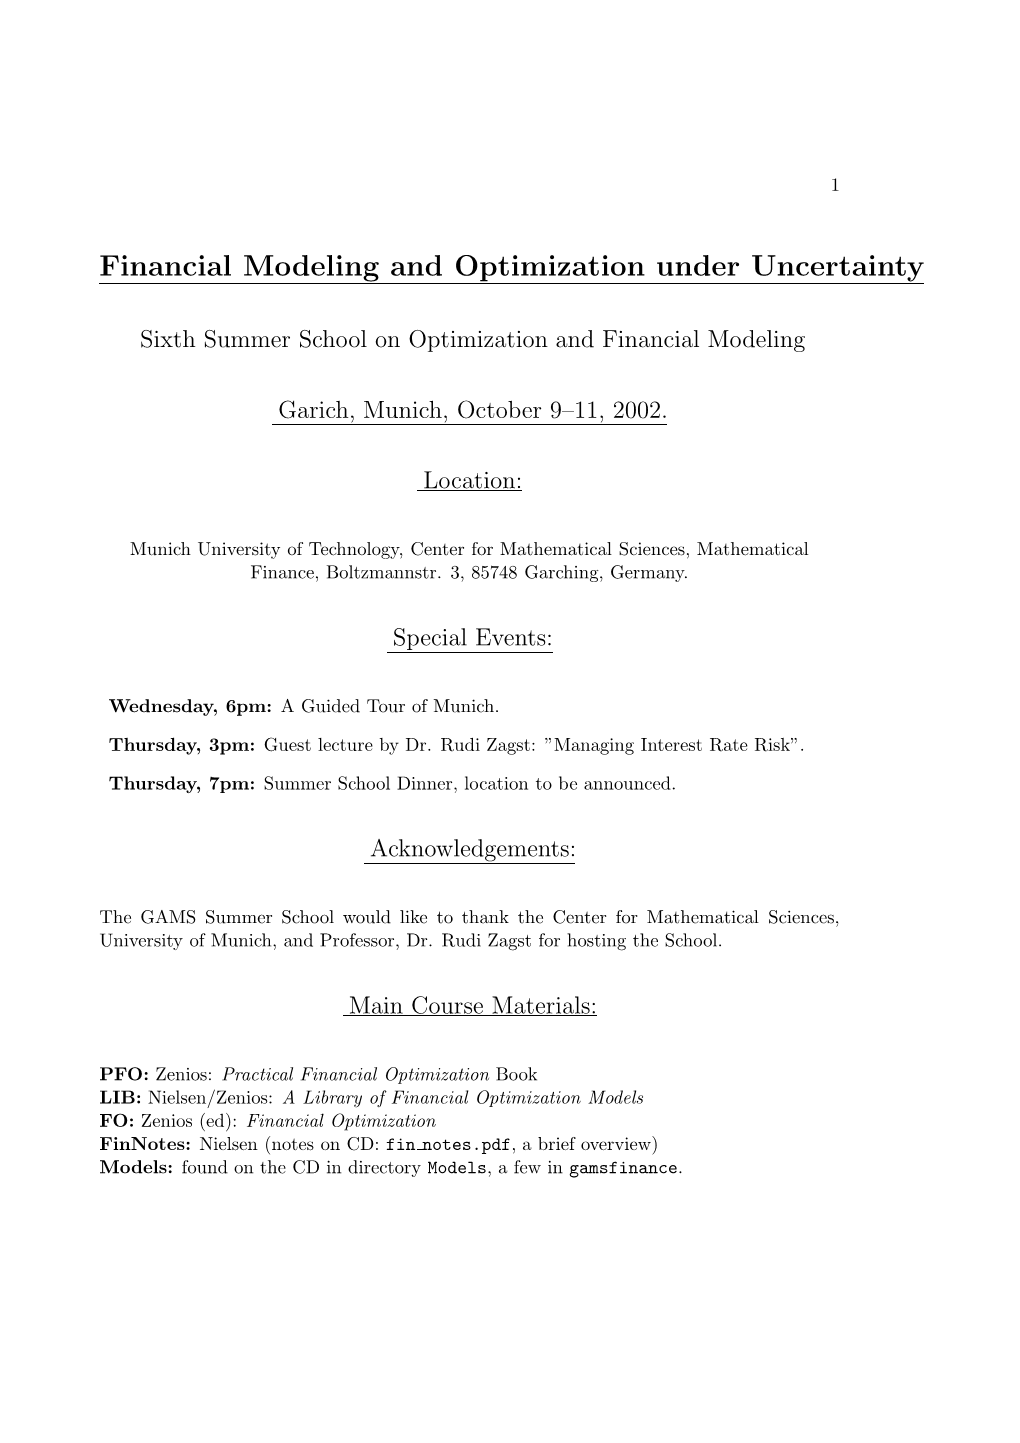 Financial Modeling and Optimization Under Uncertainty